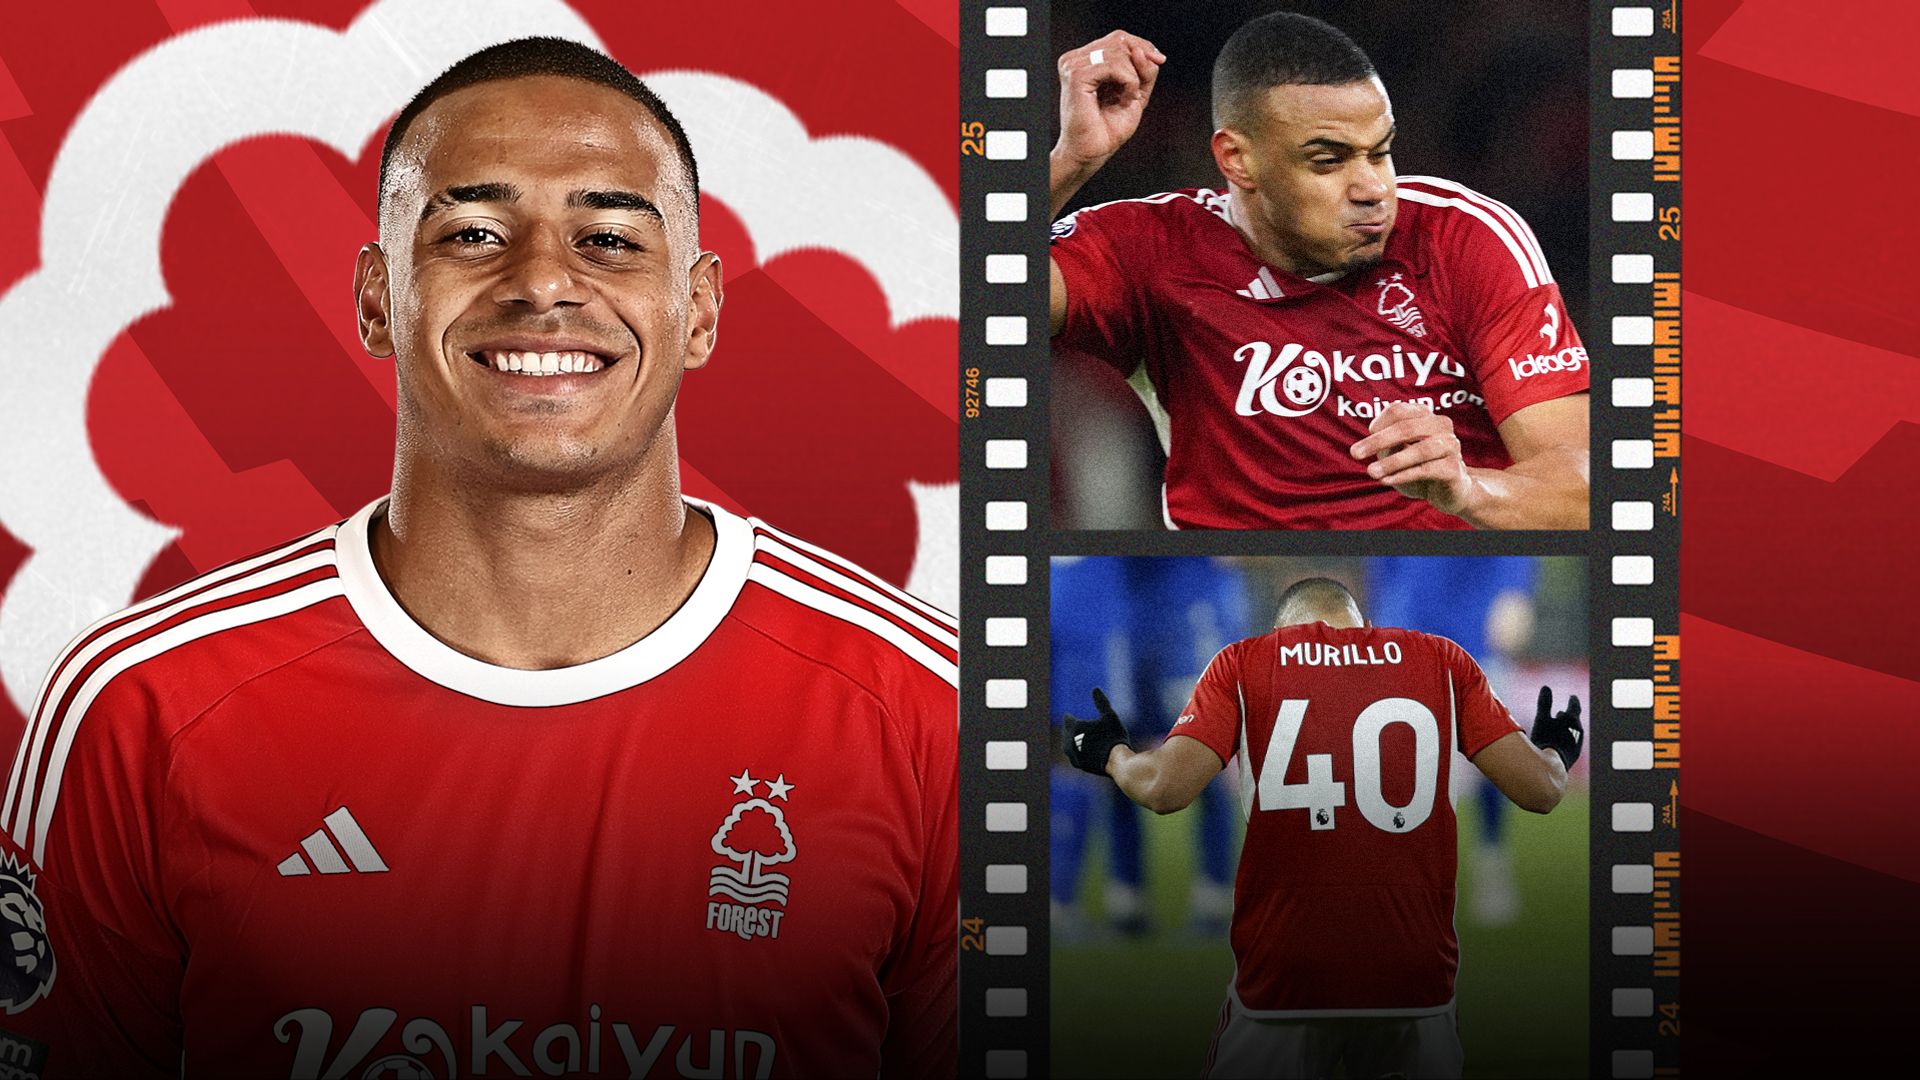 Murillo: The man bringing calmness amid the chaos at Nottingham Forest